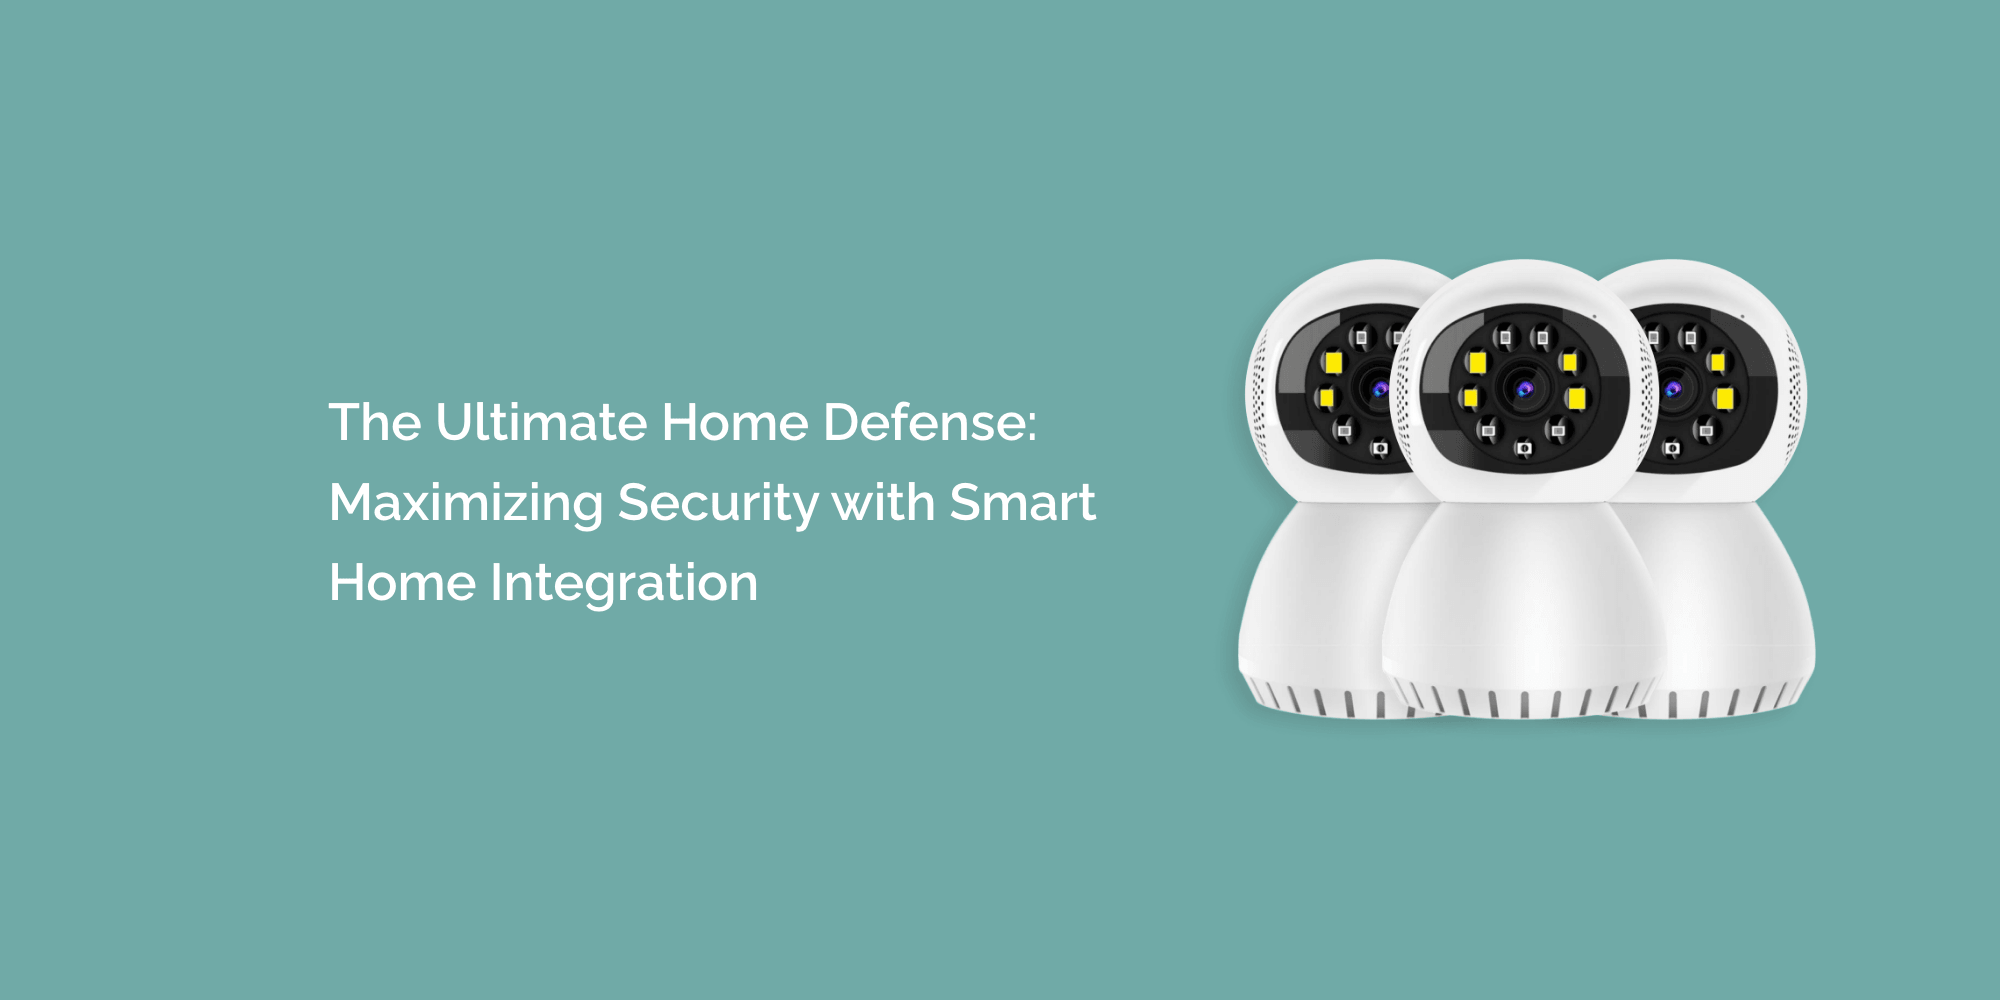 The Ultimate Home Defense: Maximizing Security with Smart Home Integration